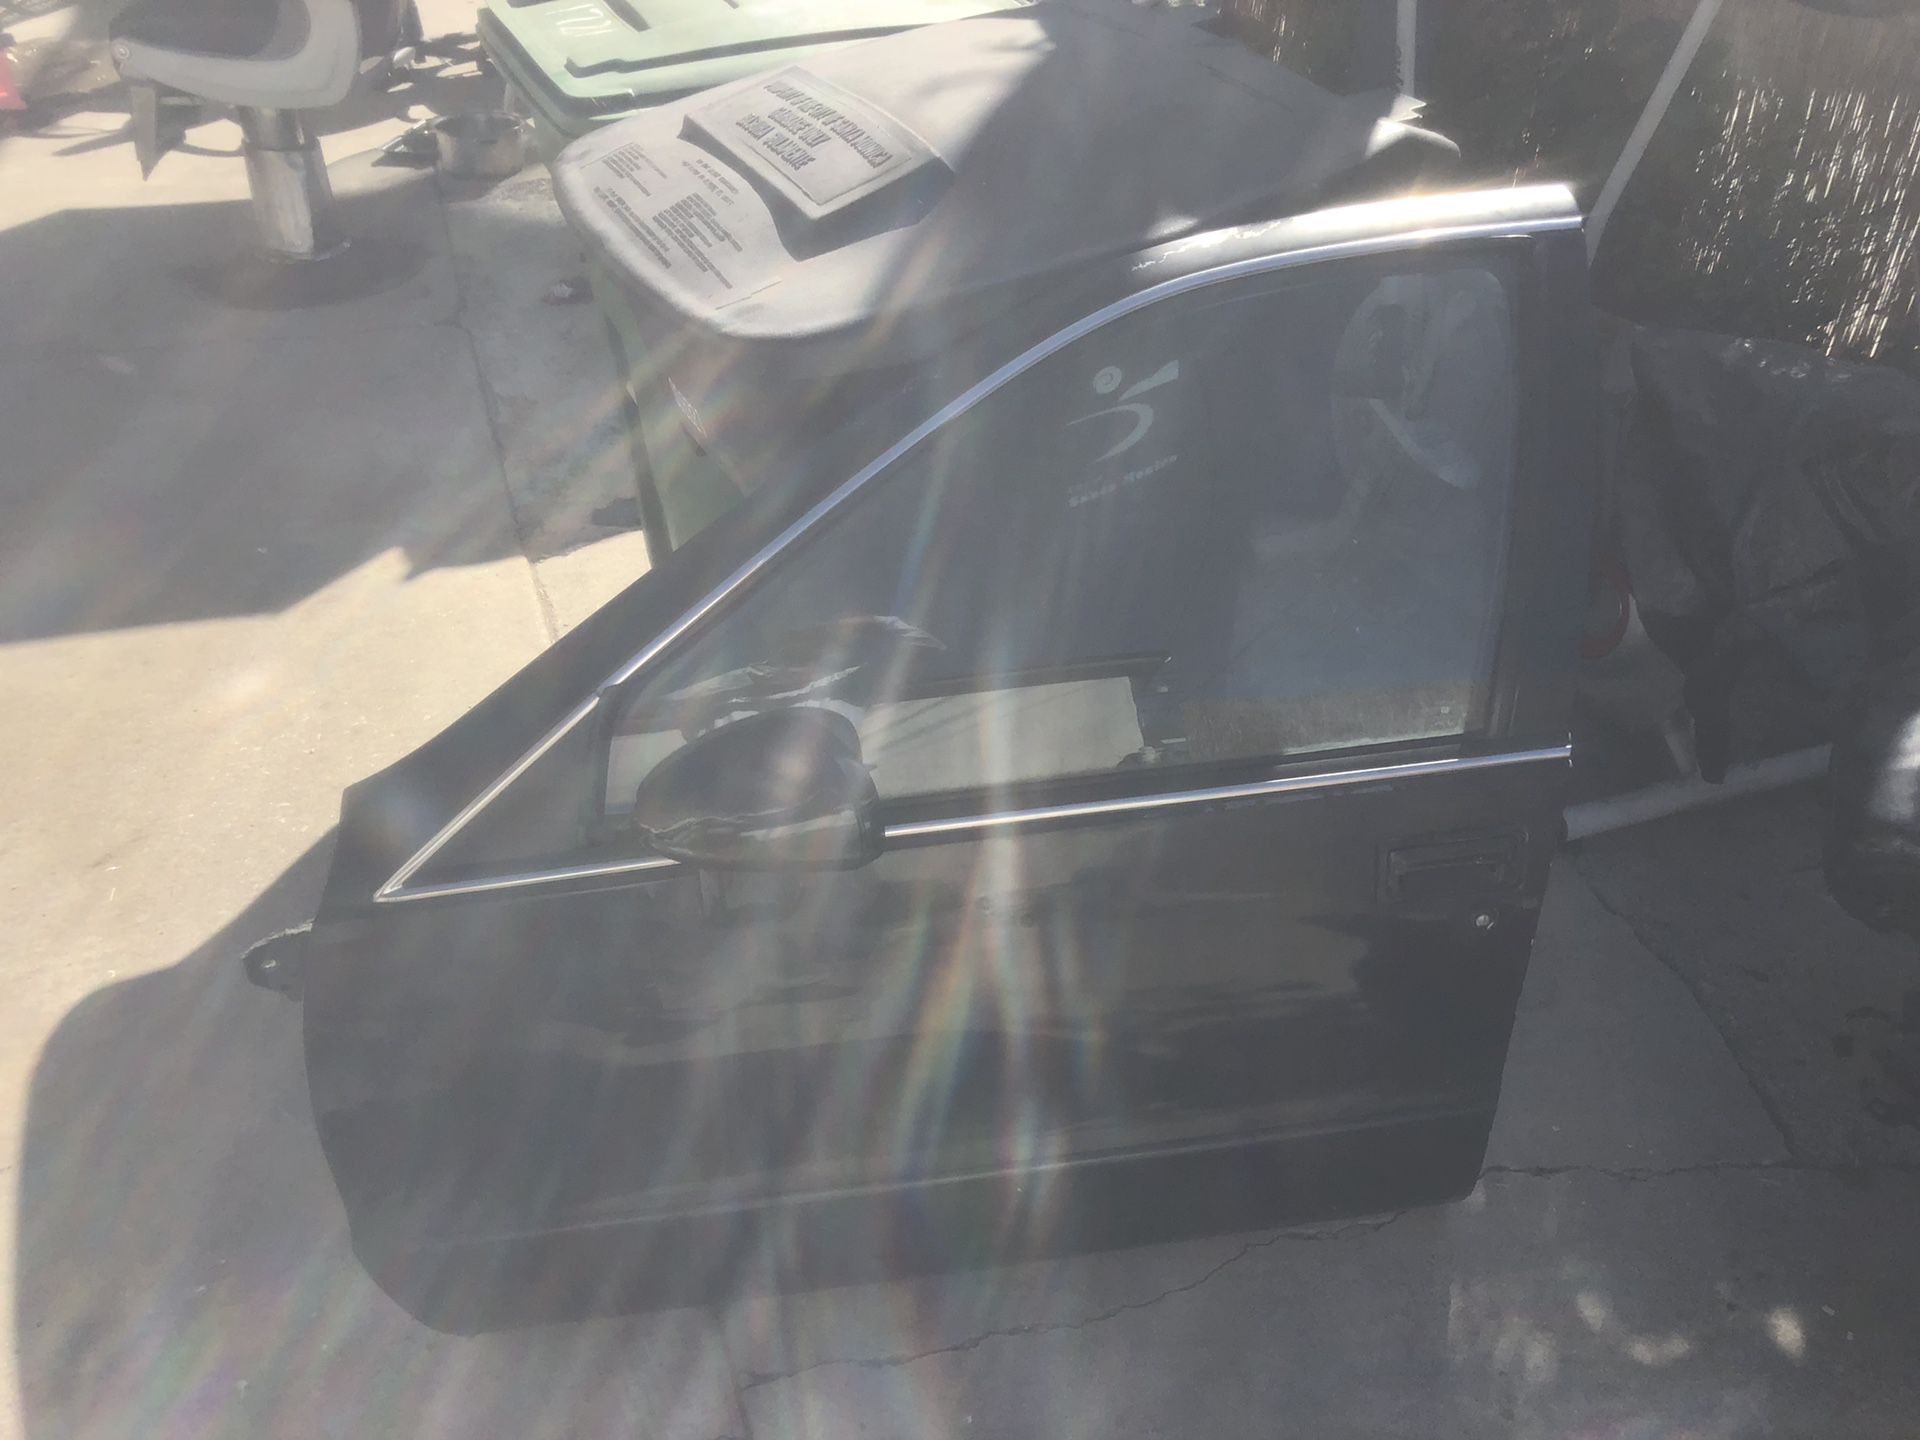 Windshields, doors for a 94-96 impala SS everything must go ASAP....